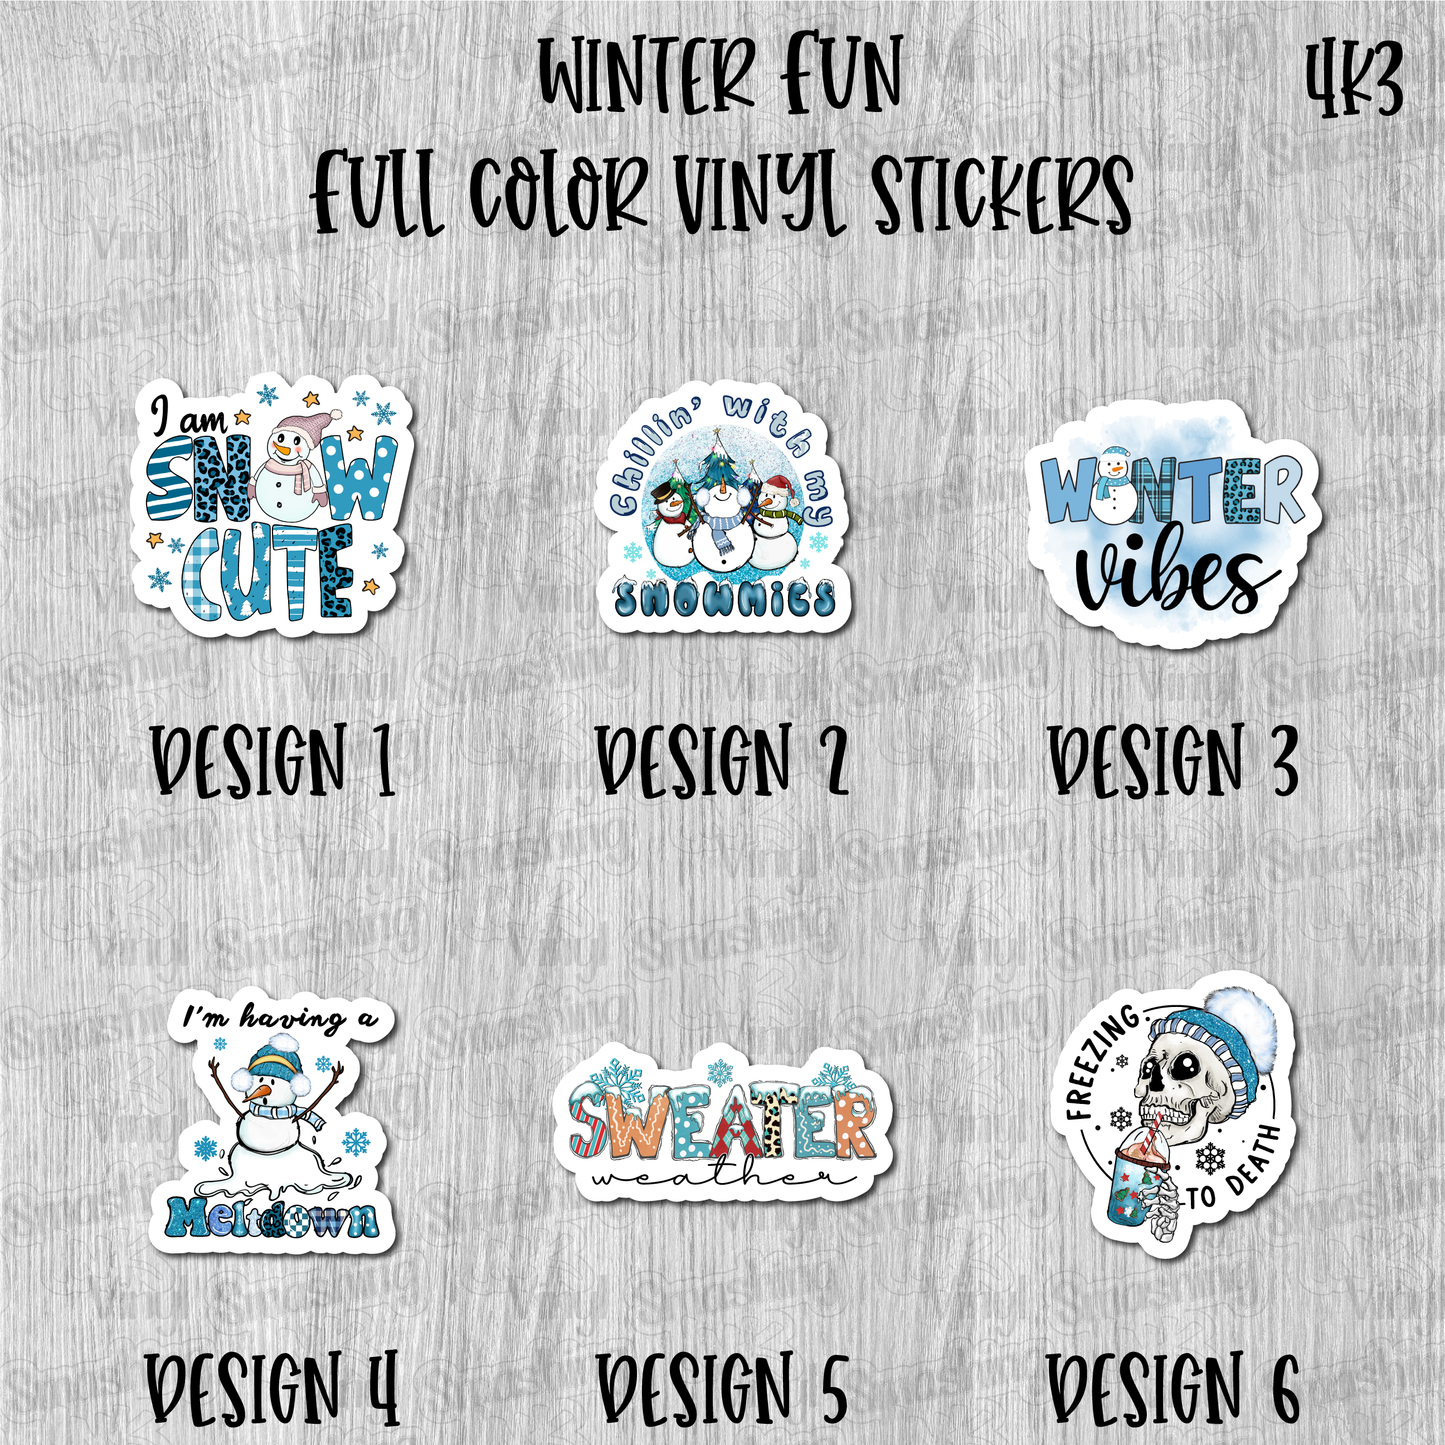 Winter Fun - Full Color Vinyl Stickers (SHIPS IN 3-7 BUS DAYS)